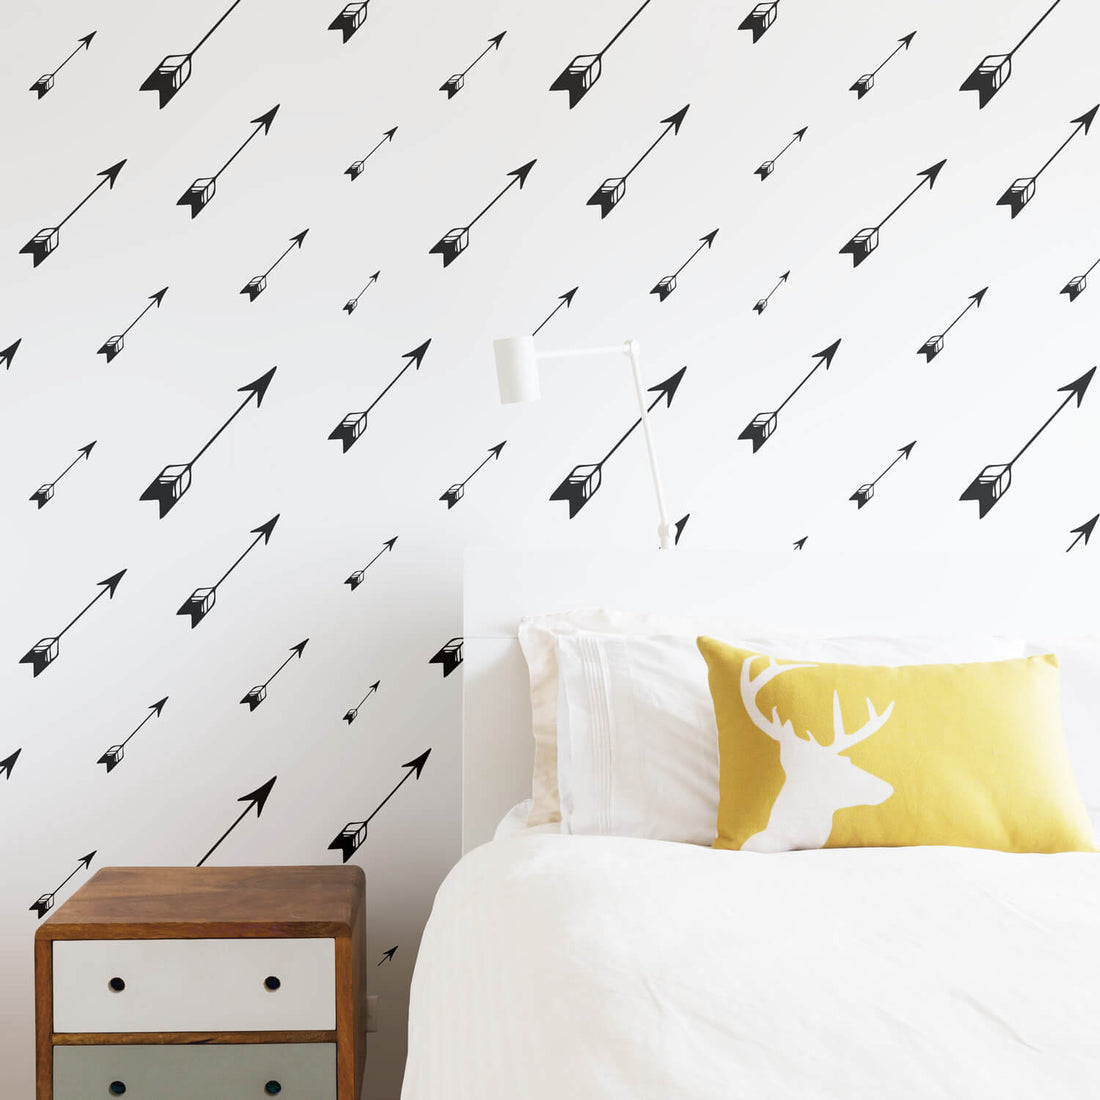 simple black and white arrow pattern removable wallpaper for boys bedroom